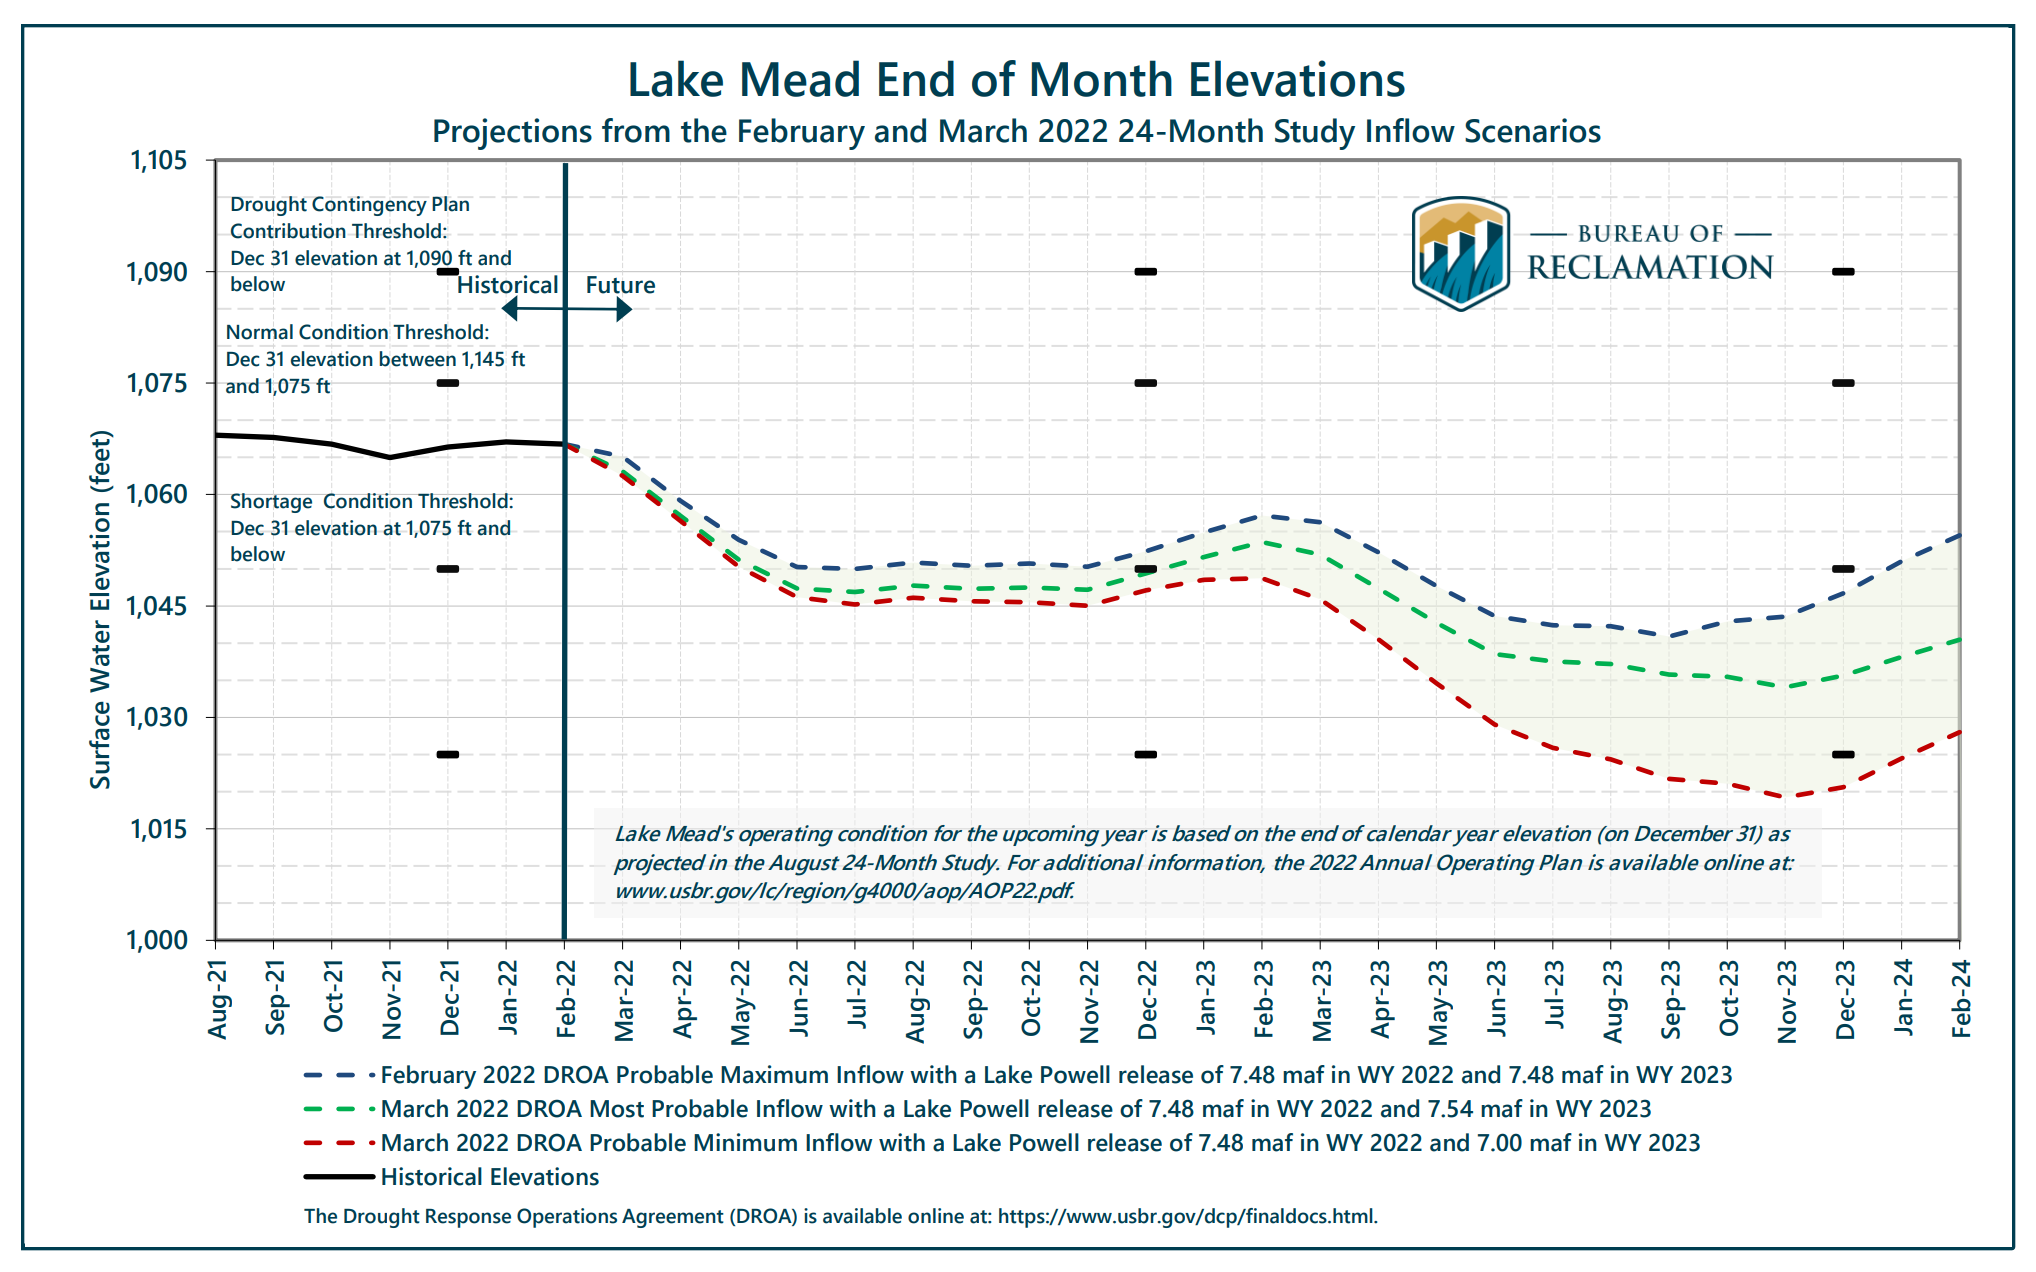 Lake Mead end of month elevations, projections from the February and March 2022 24-month study inflow scenarios. Water year 2022 got off to a promising start in the Colorado River Basin with a wetter-than-normal October, but it was followed by the second-driest November on record and resulted in a loss of 1.5 million acre-feet of inflow for Lake Powell compared to the previous month’s projections. December projections showed the reservoir dropping below the target elevation of 3,525 feet as early as February 2022. As defined in the Drought Response Operations Agreement, the target elevation provides a sufficient buffer to allow for response actions to prevent Lake Powell from dropping below the minimum power pool elevation of 3,490 feet, the lowest elevation that Glen Canyon Dam can generate hydropower. Graphic: U.S. Bureau of Reclamation